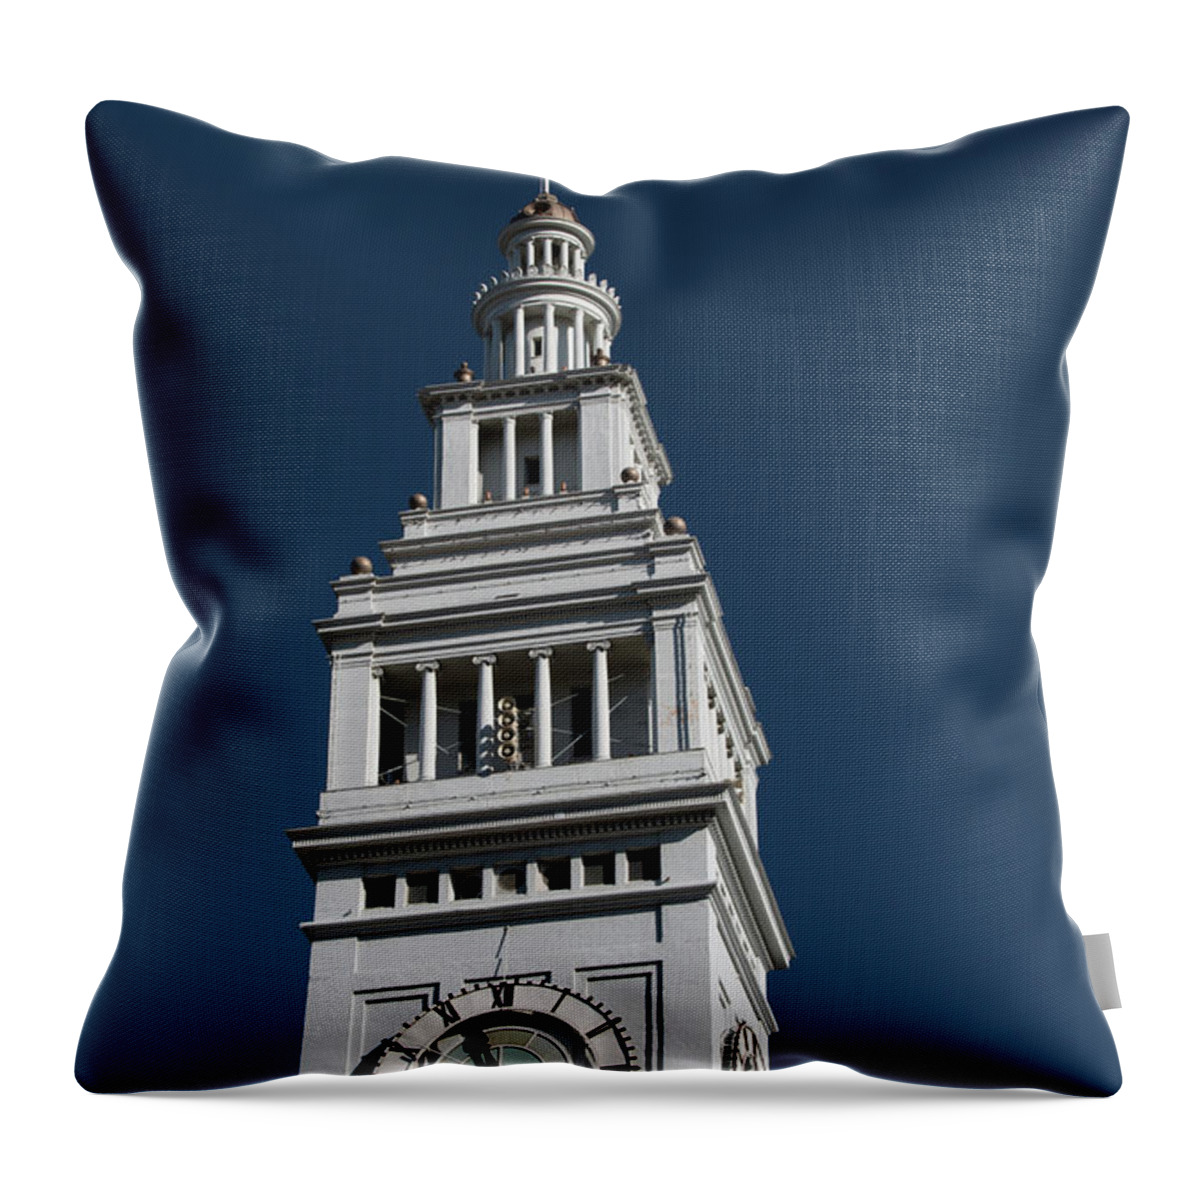 Built Throw Pillow featuring the photograph Clock tower of the train station in San Francisco by Amanda Mohler